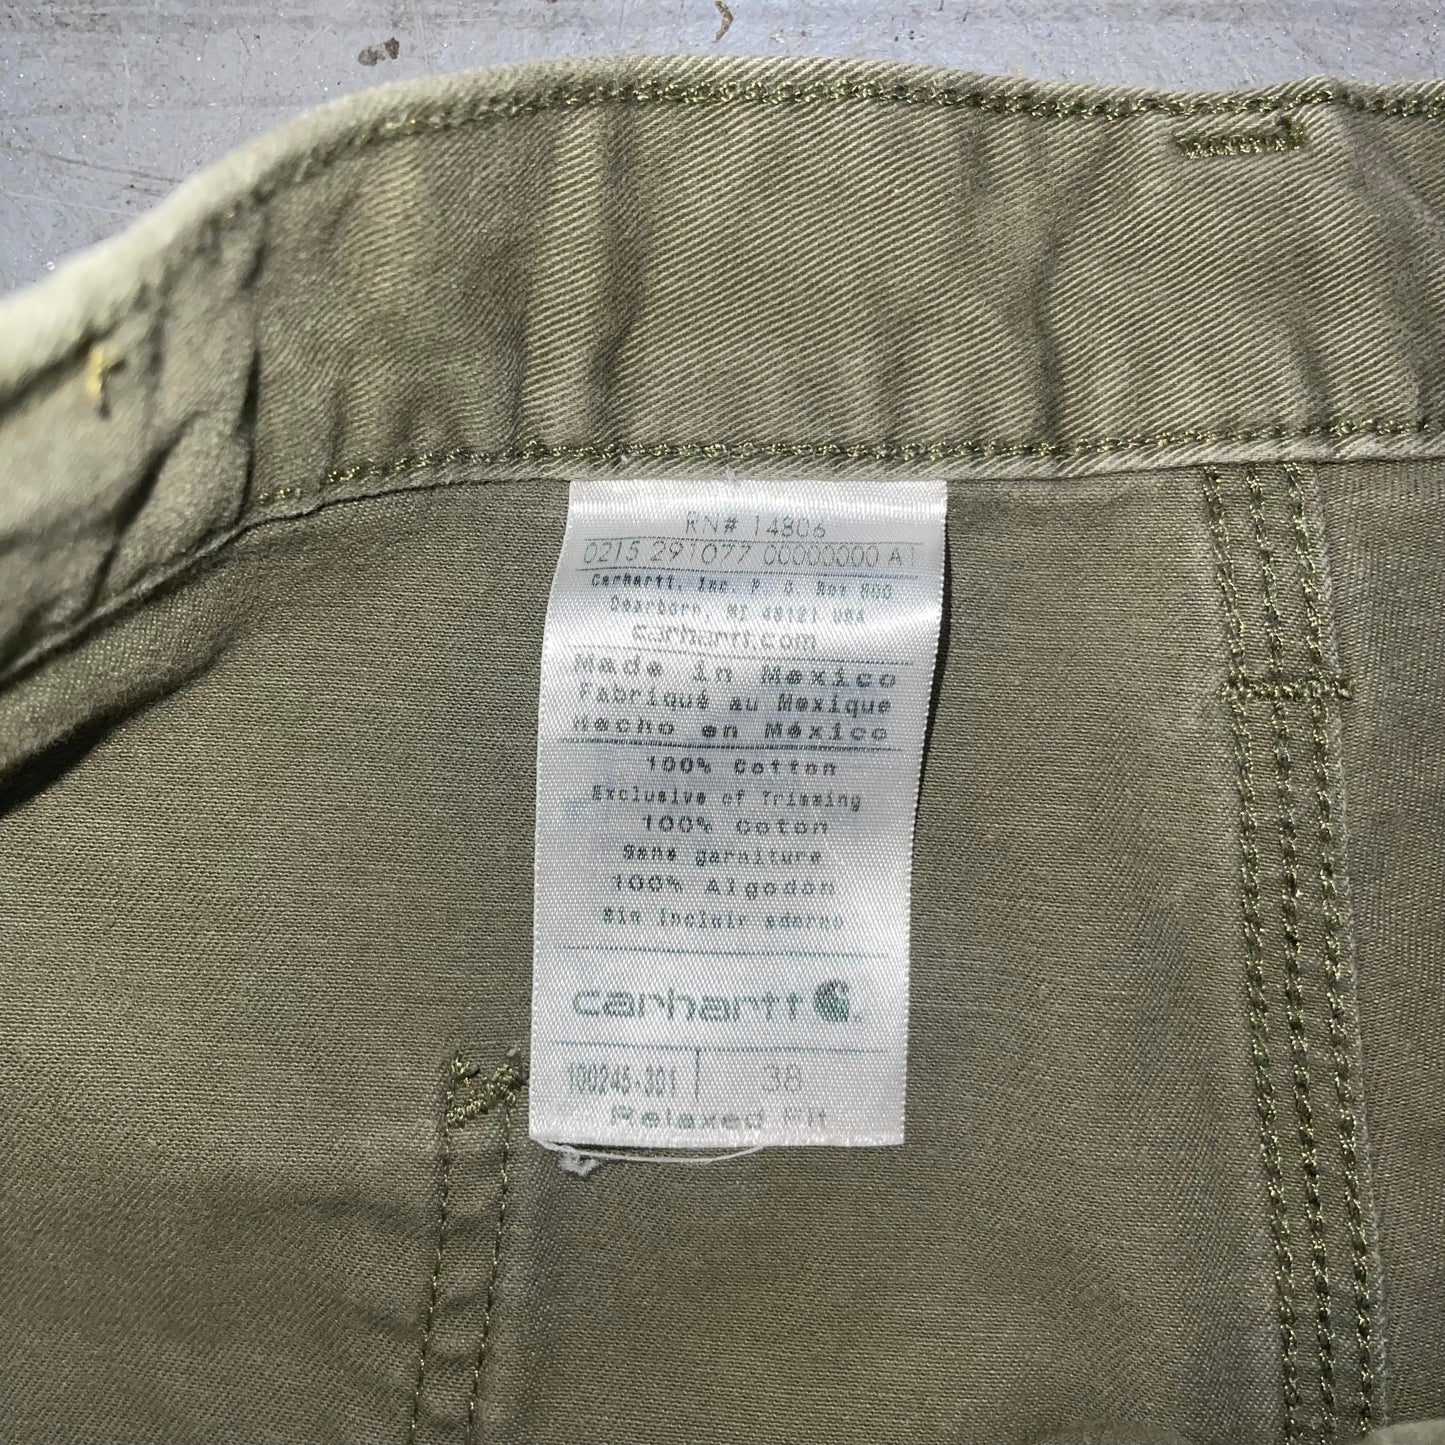 Carhartt Carpenter Relaxed Fit Workwear Shorts. Size 38